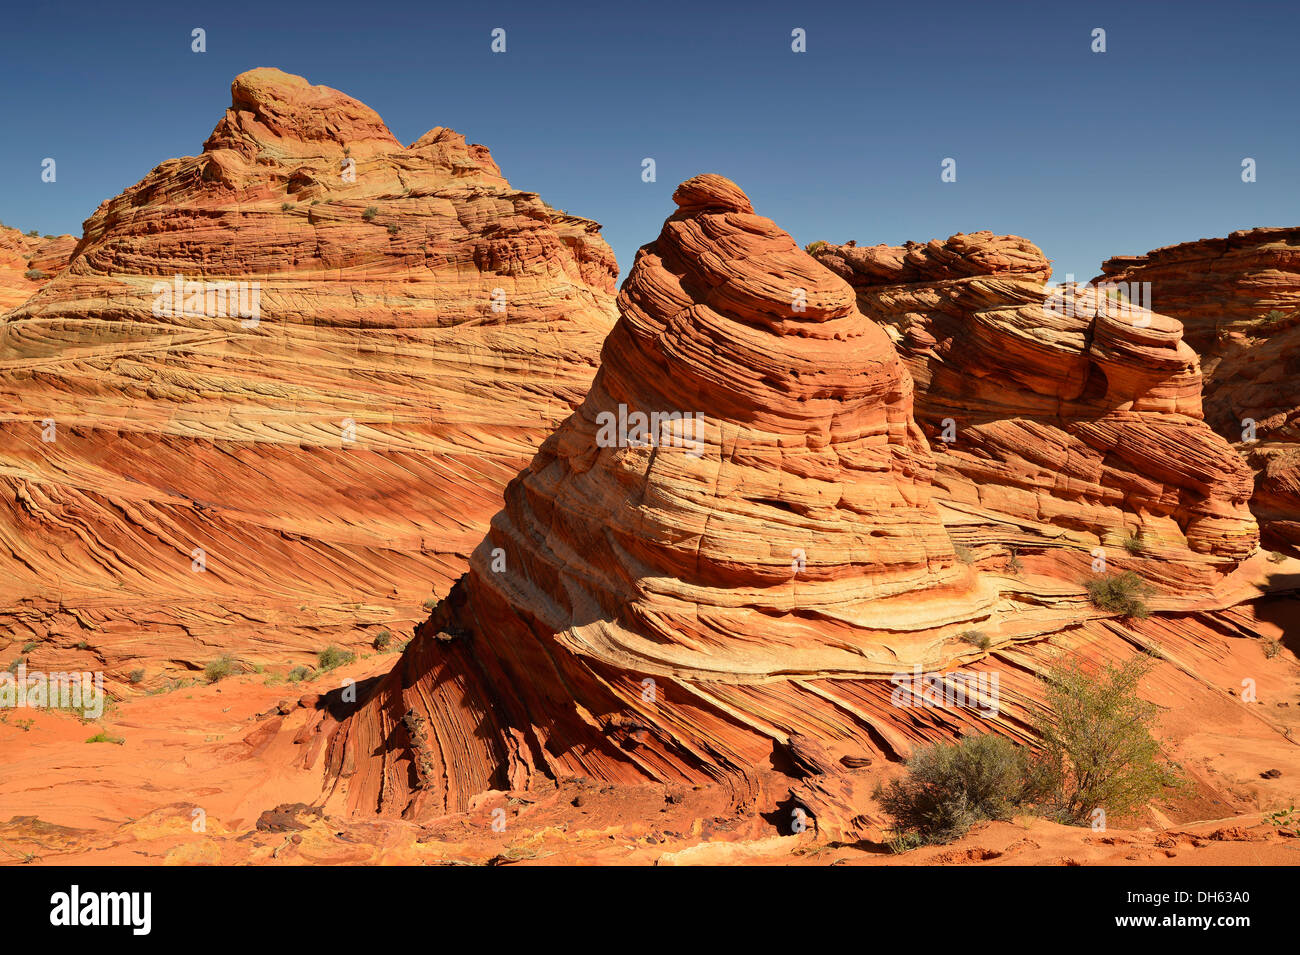 'The Cove', Brain Rocks of the Coyote Buttes South CBS, Cottonwood Teepees, eroded Navajo sandstone rock formations with Stock Photo